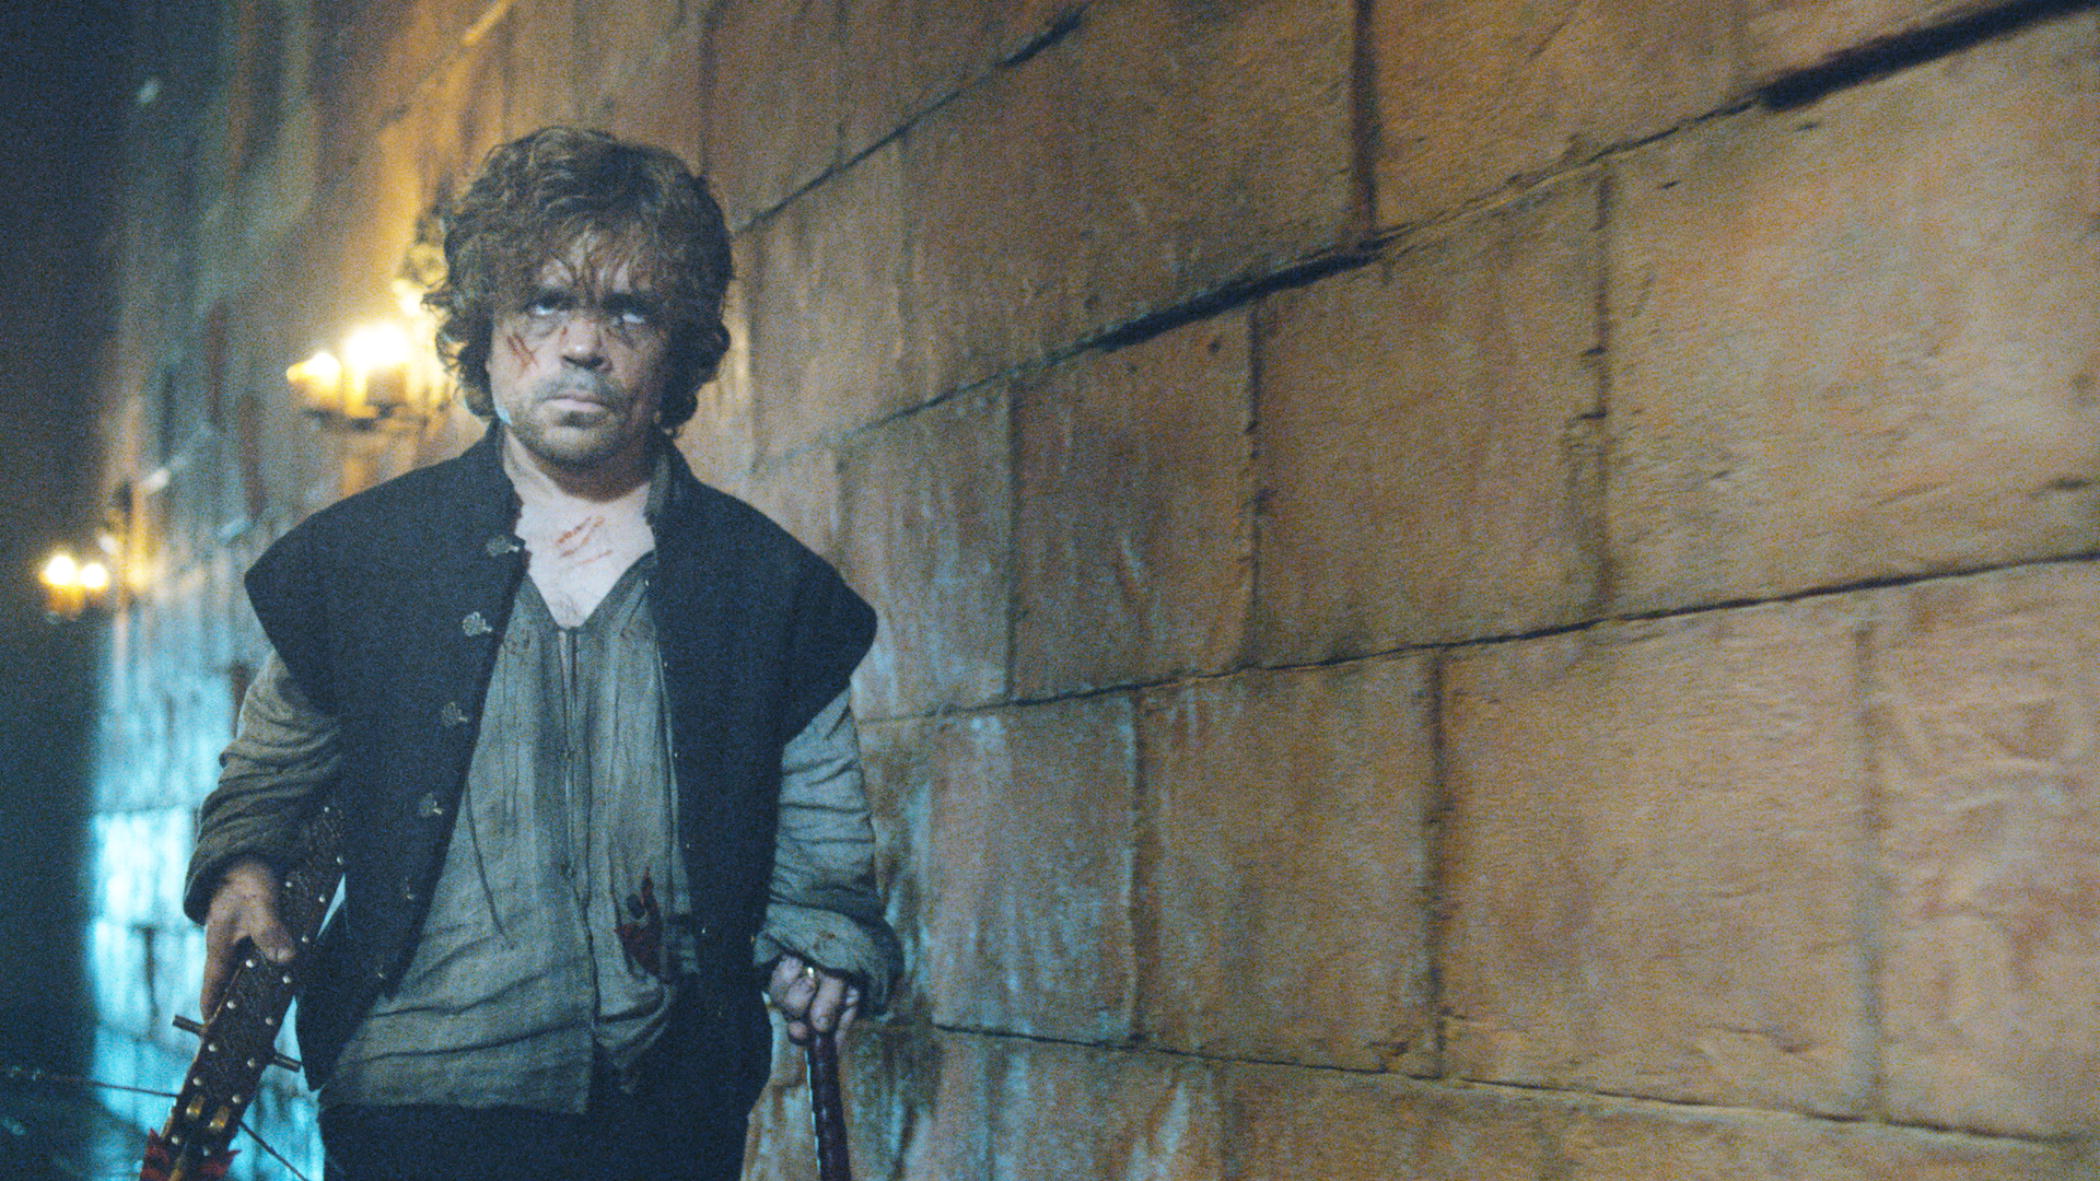 game of thrones, tv show, peter dinklage, tyrion lannister